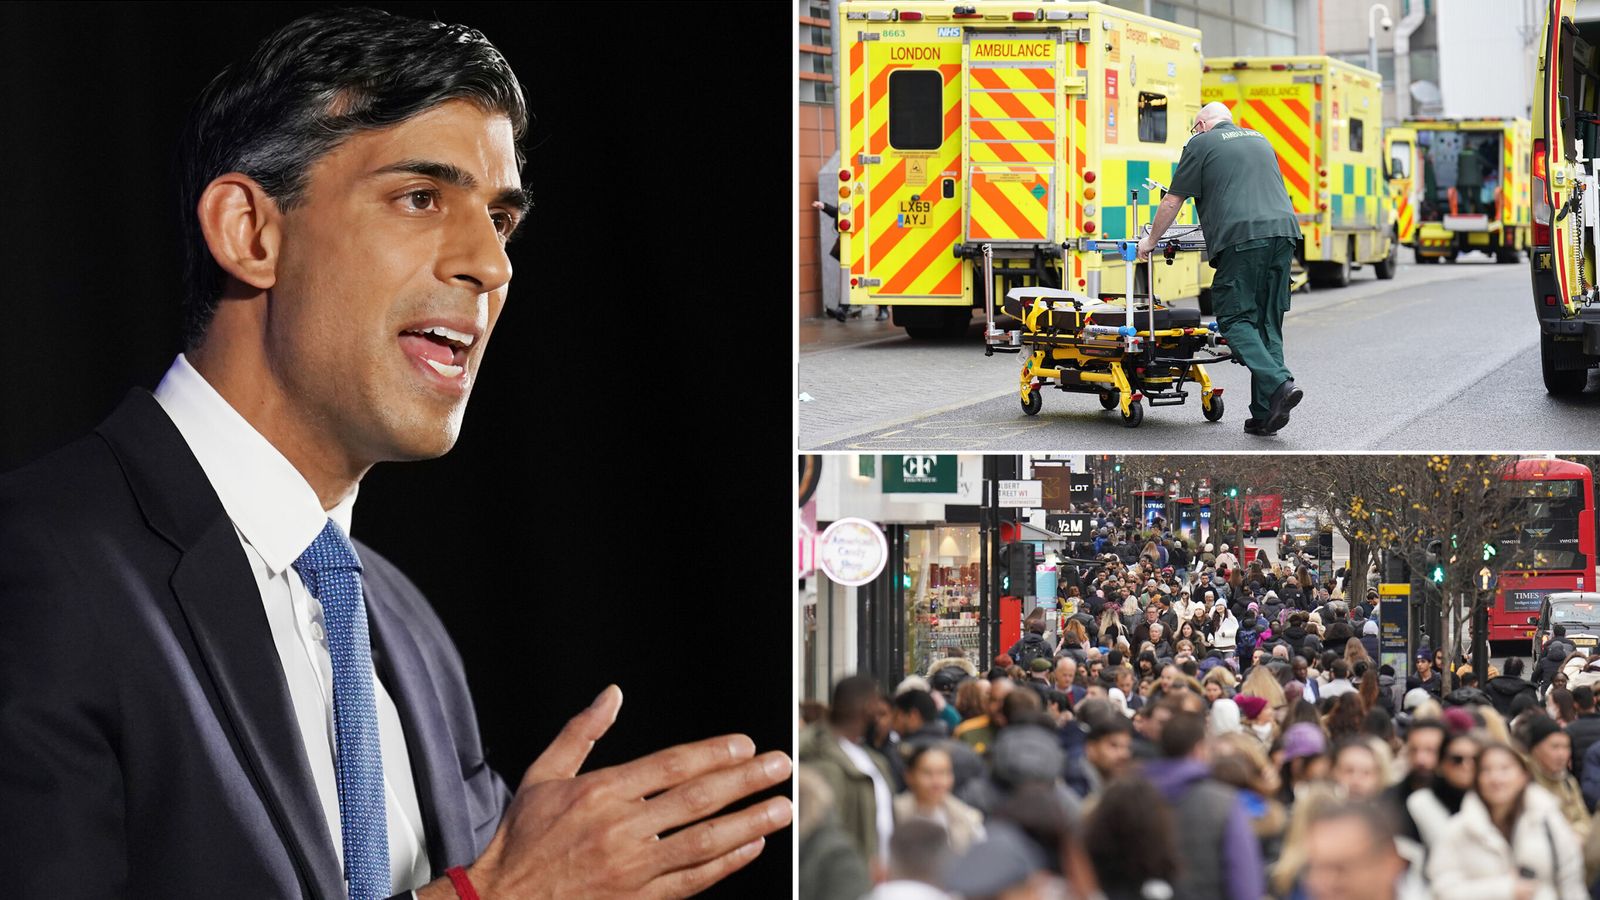 Rishi Sunak makes five promises on economy, health and immigration in keynote speech